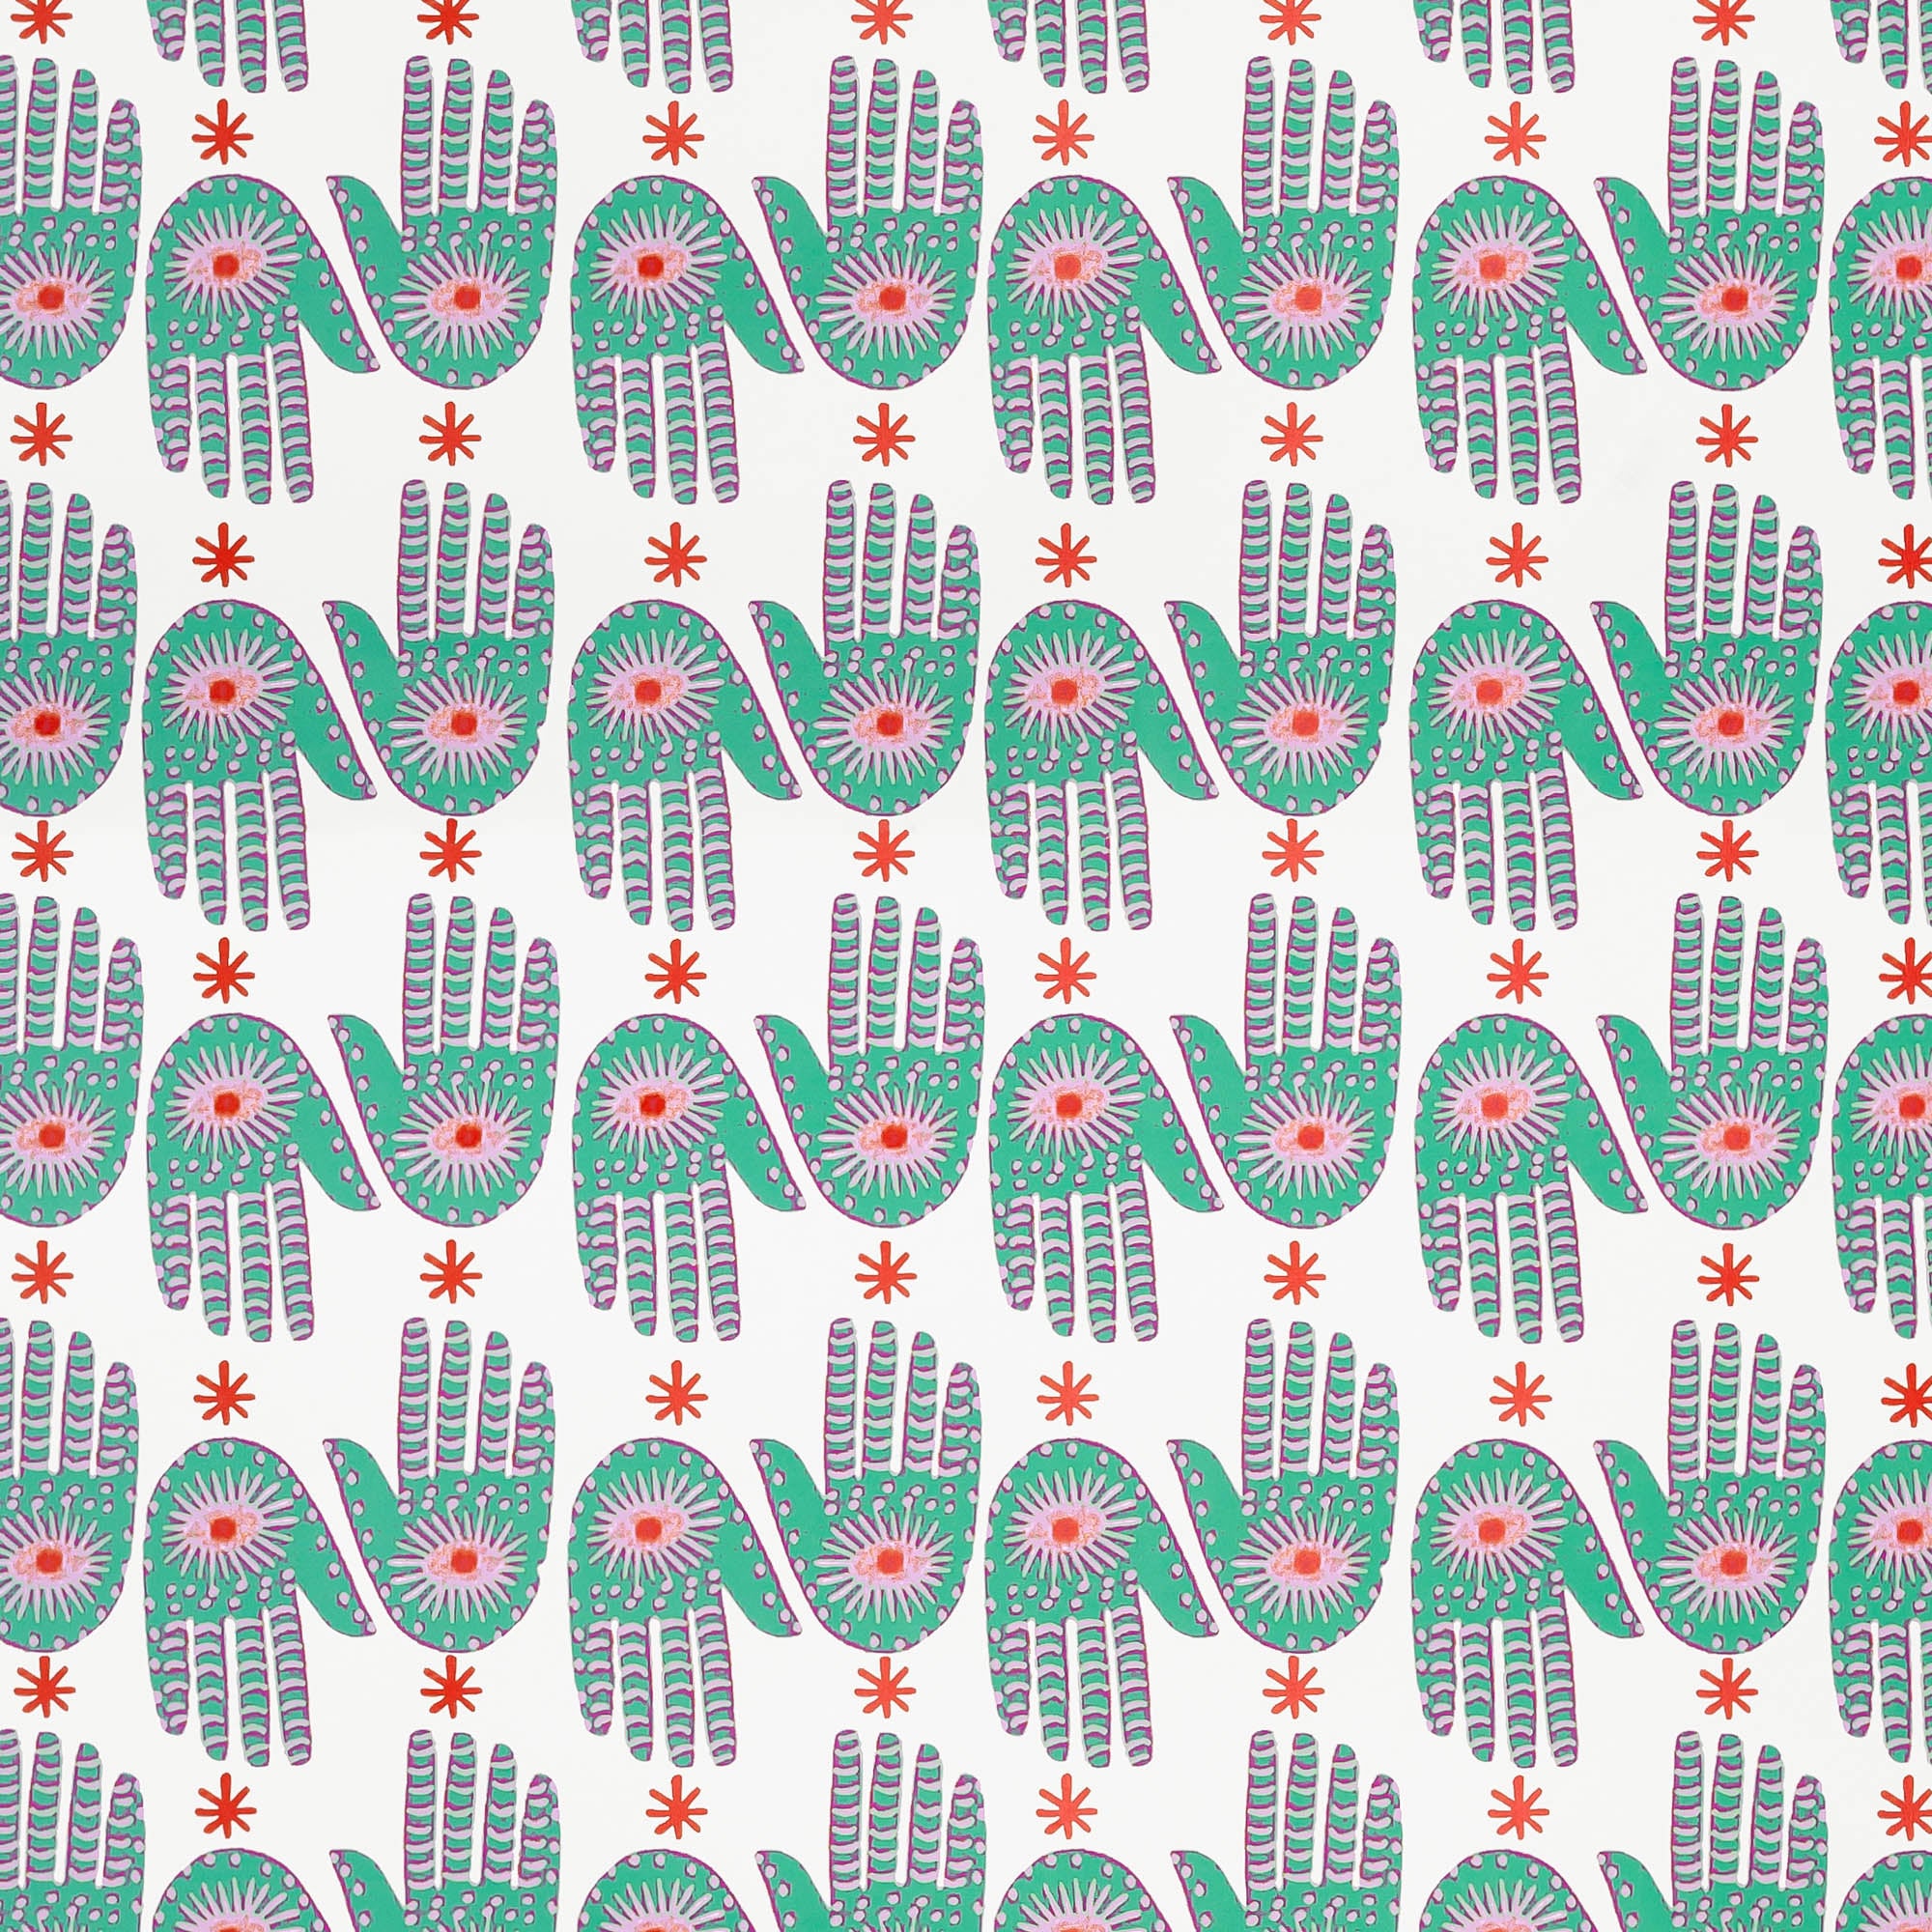 Detail of wallpaper in a playful hamsa hand print in green, pink and red on a white field.